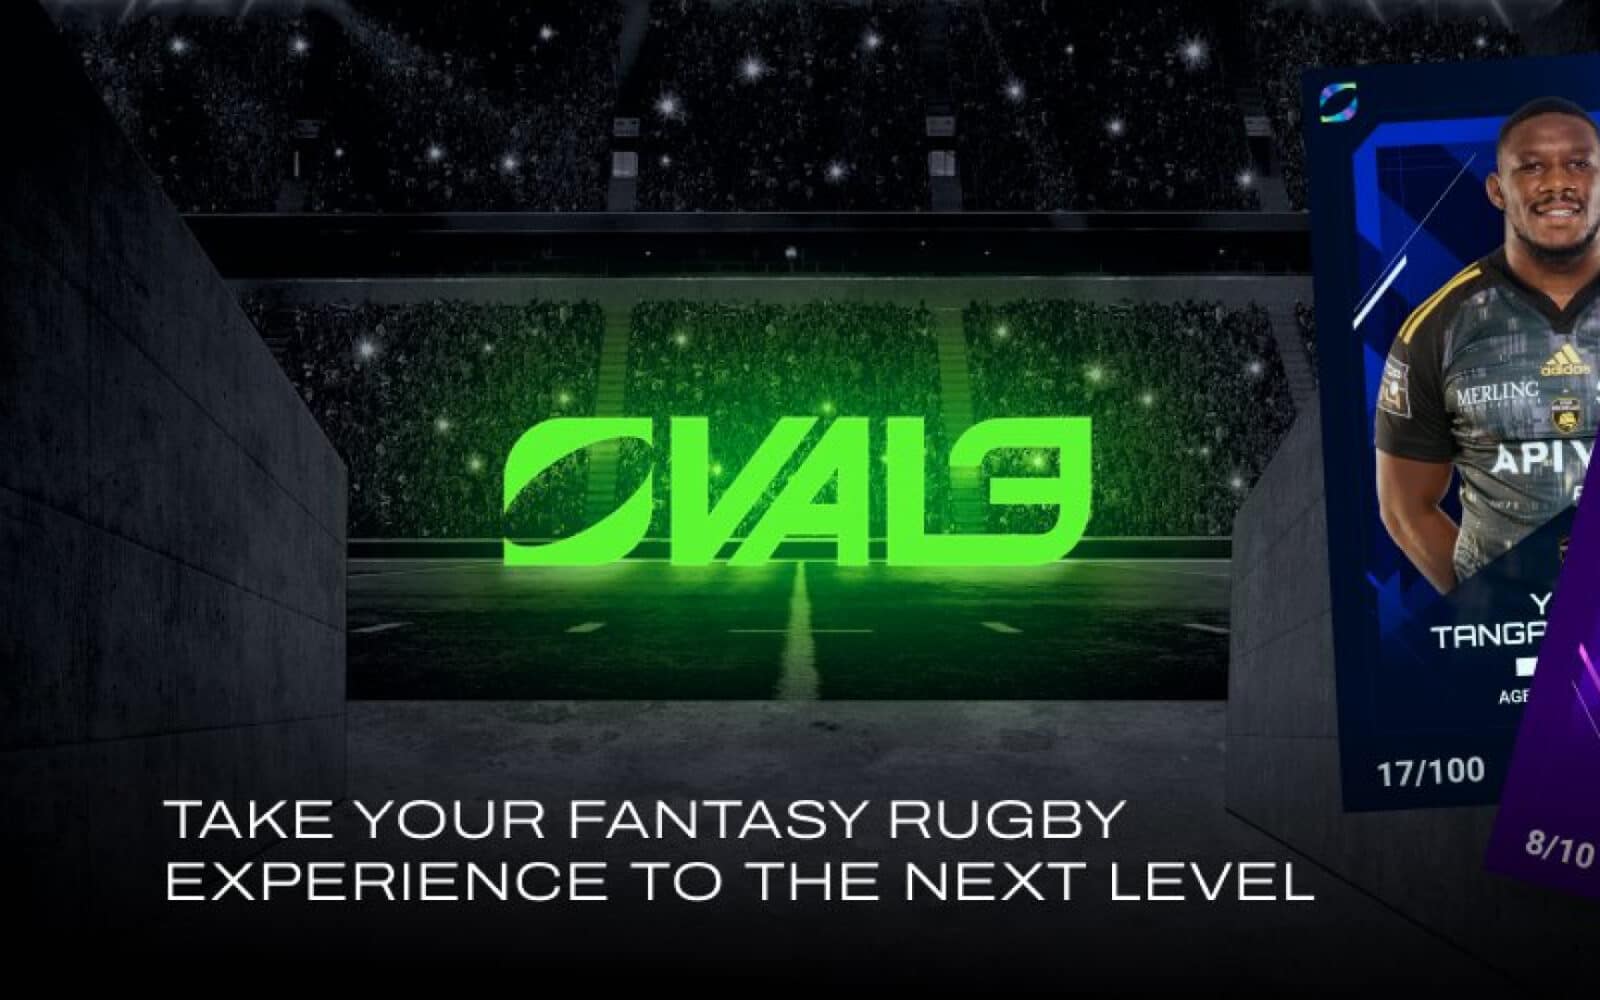 OVAL3 Rugby